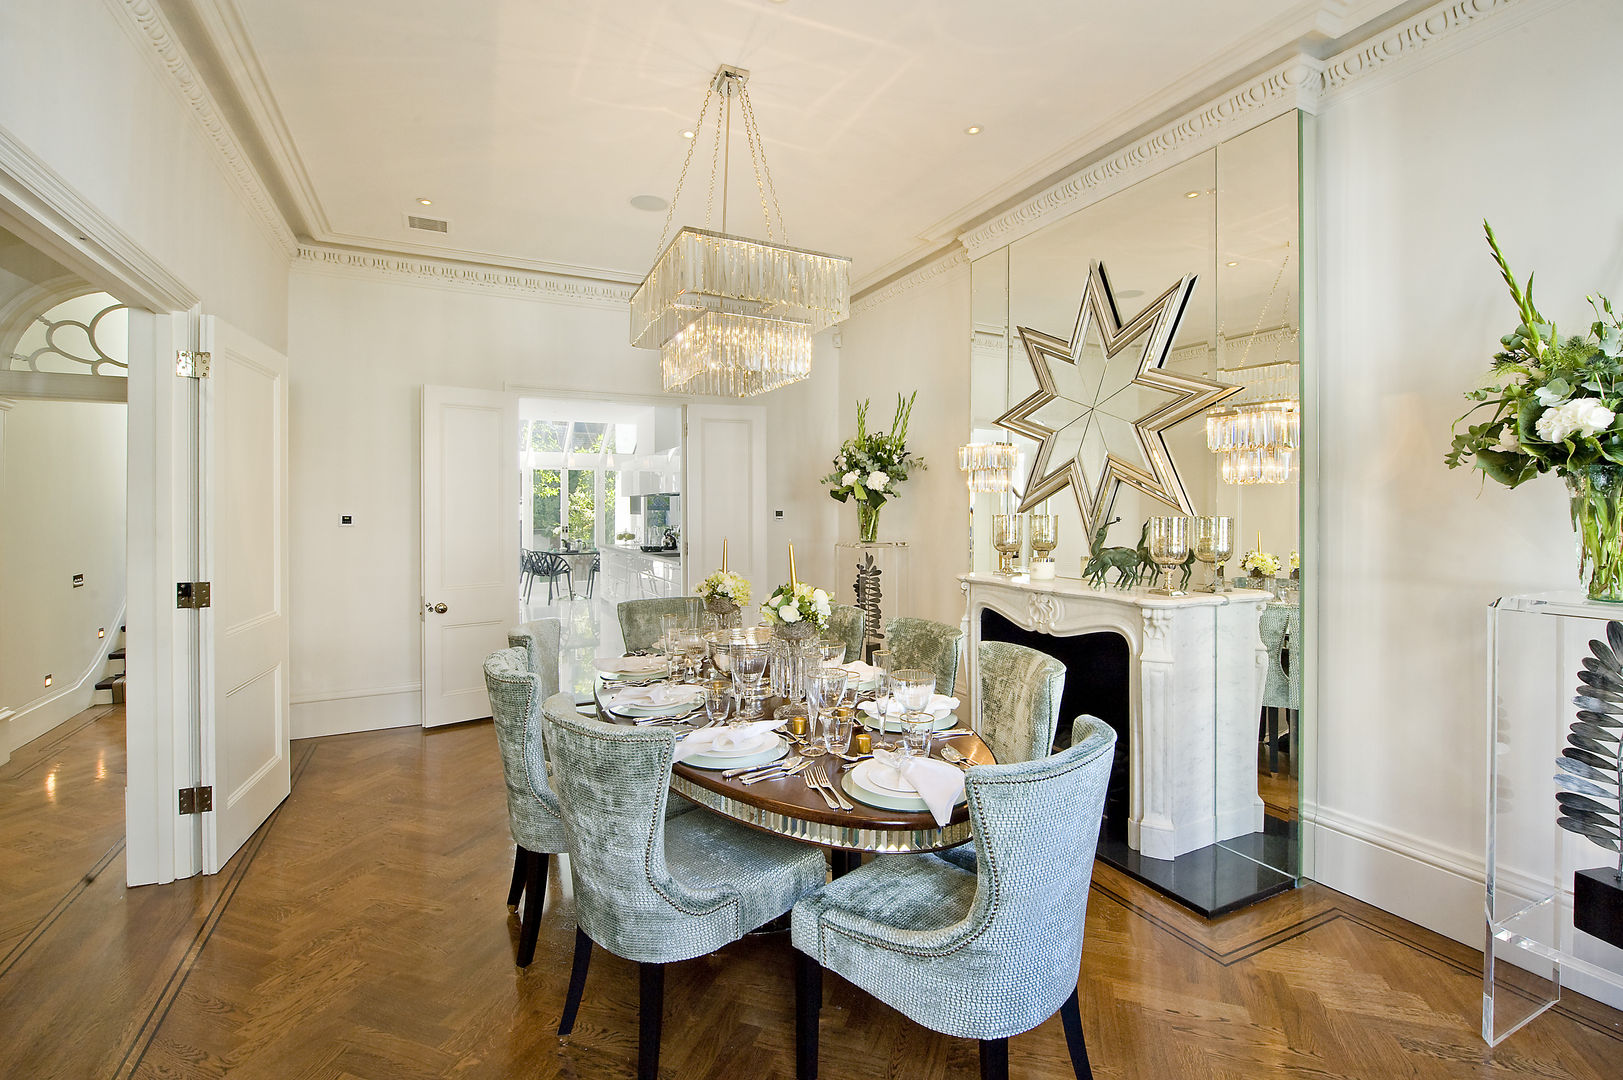 Dining room at the Chester Street House Nash Baker Architects Ltd Salle à manger classique